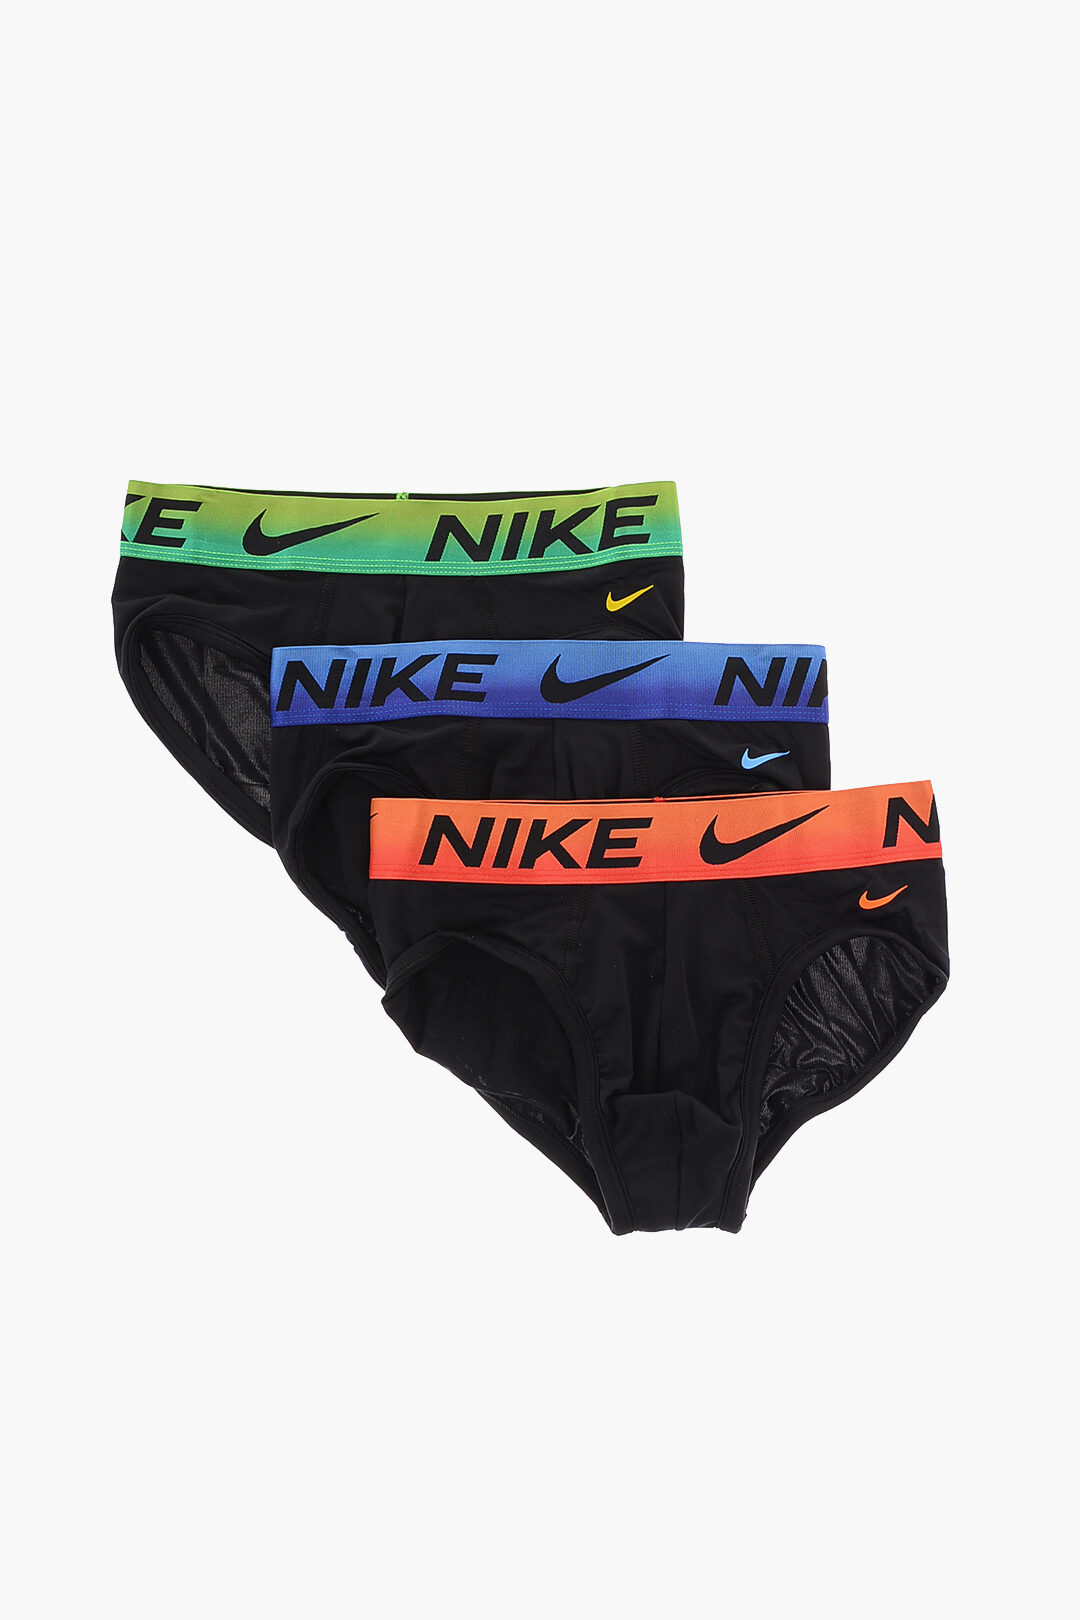 Nike Set of 3 Dri-Fit Briefs with Logoed Elastic Band men